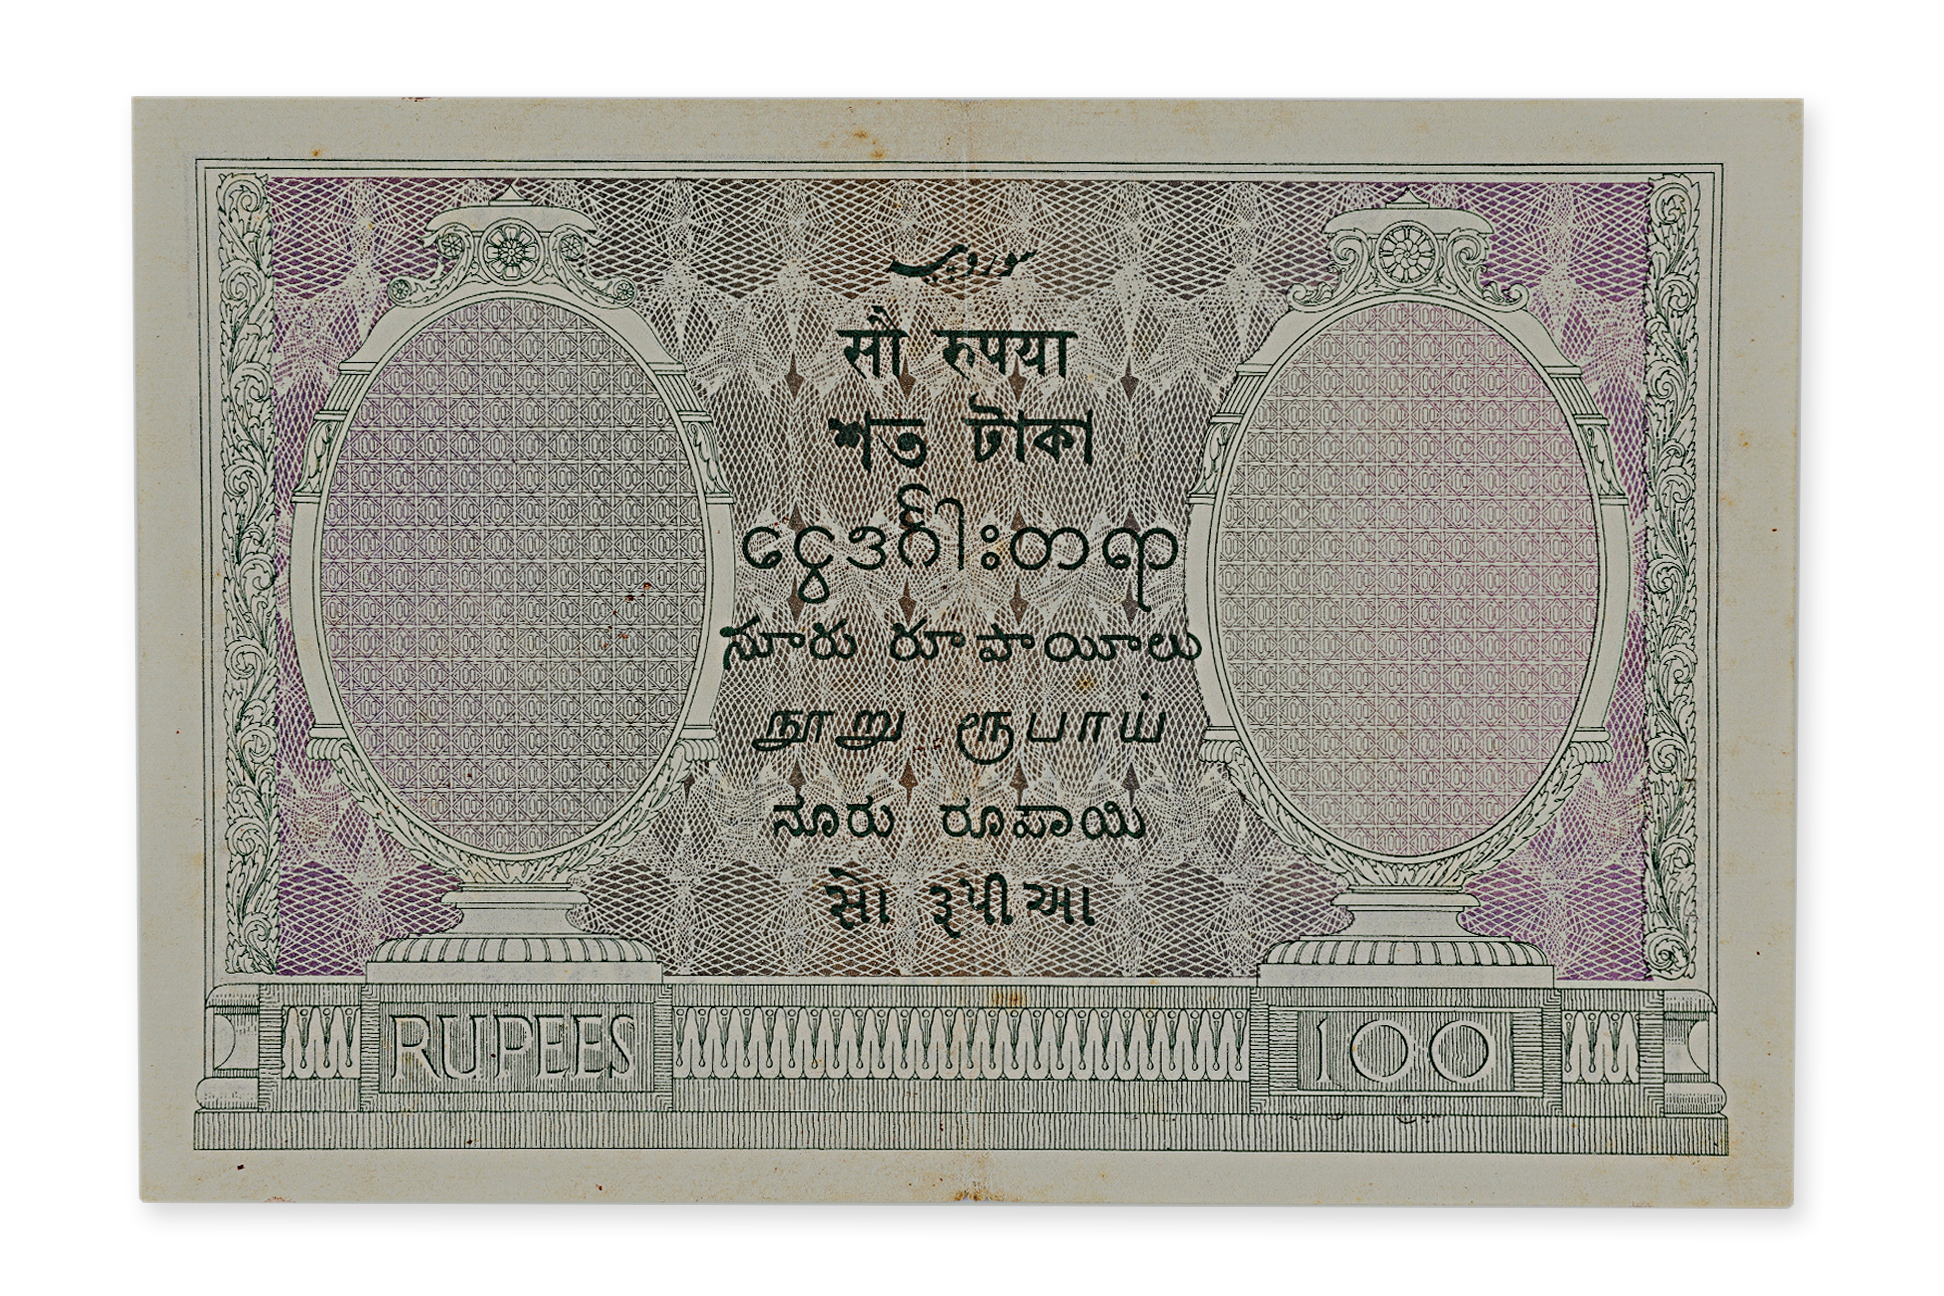 GOVERNMENT OF INDIA GEORGE V 100 RUPEES MADRAS - Image 2 of 4